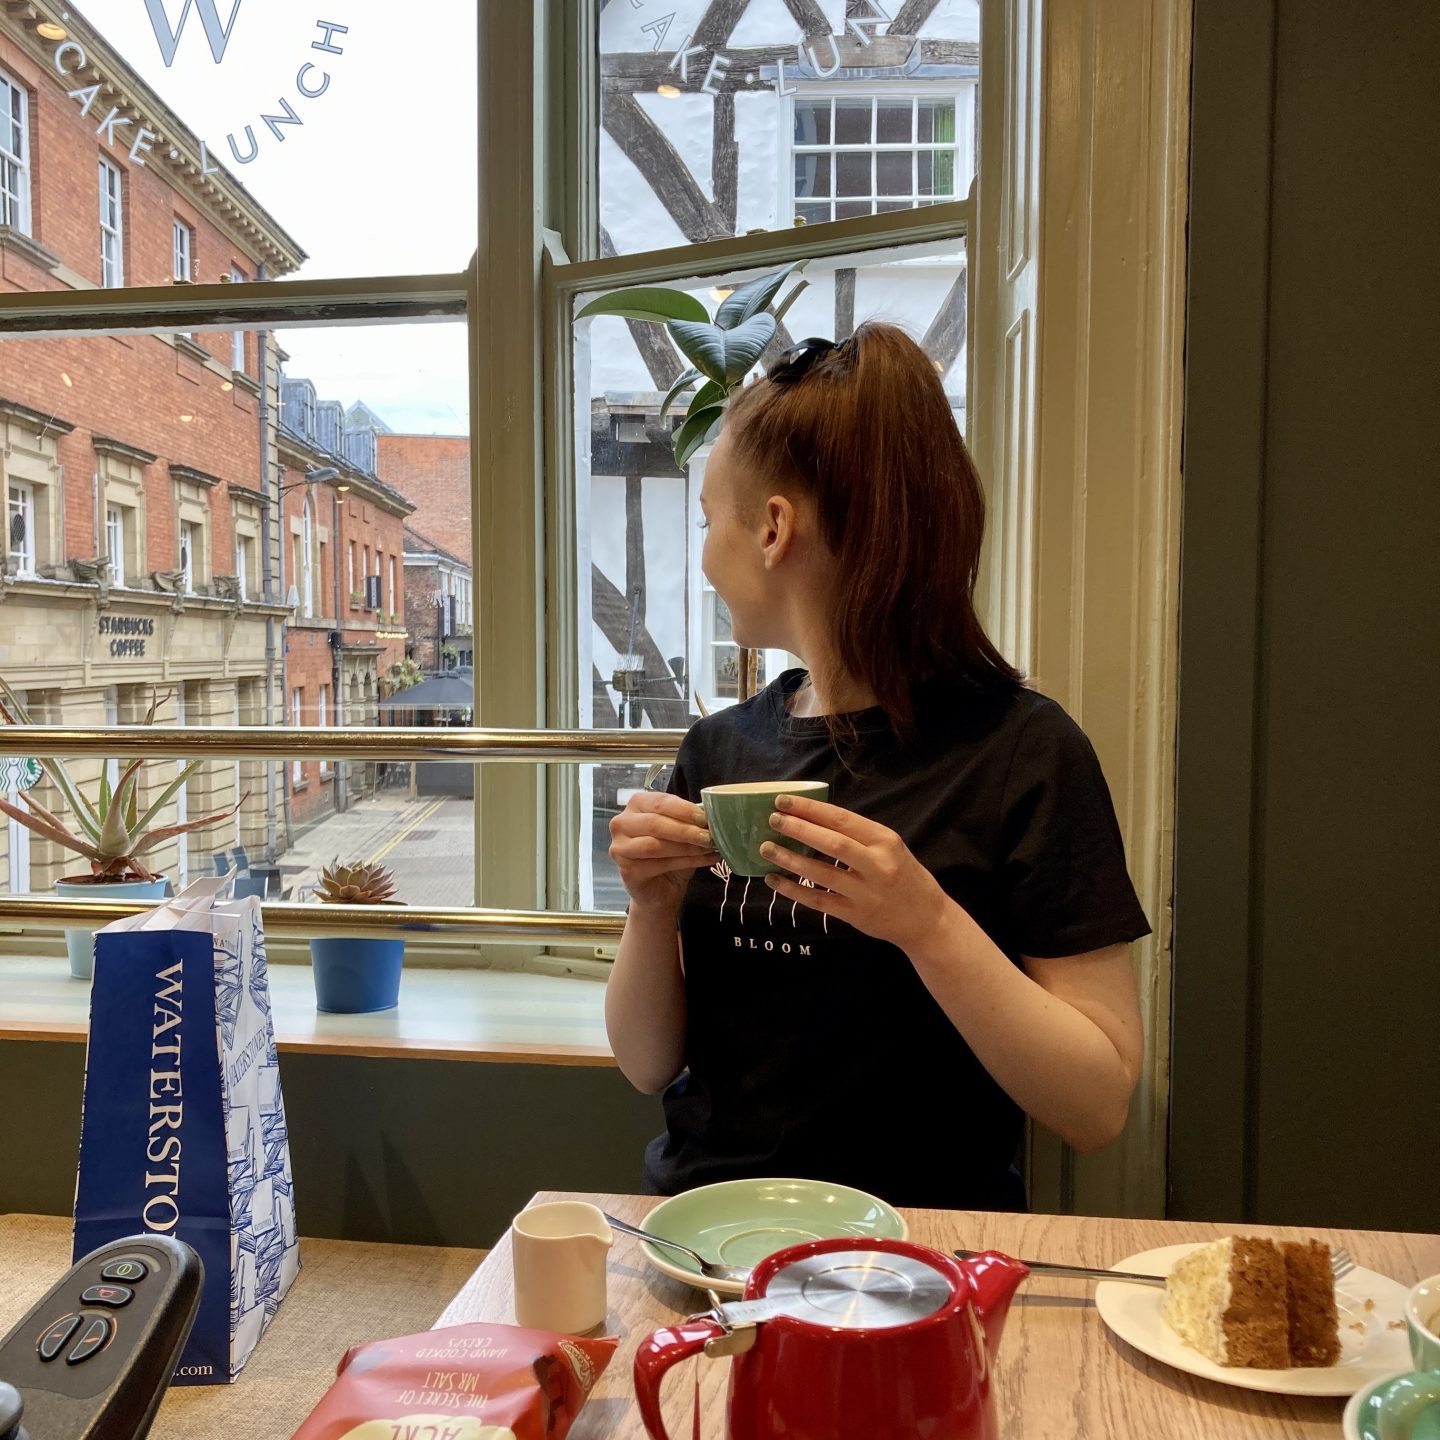 pippa sat inside cafe w, one of york's wheelchair accessible cafes, holding a cup of tea and looking out of the window behind her